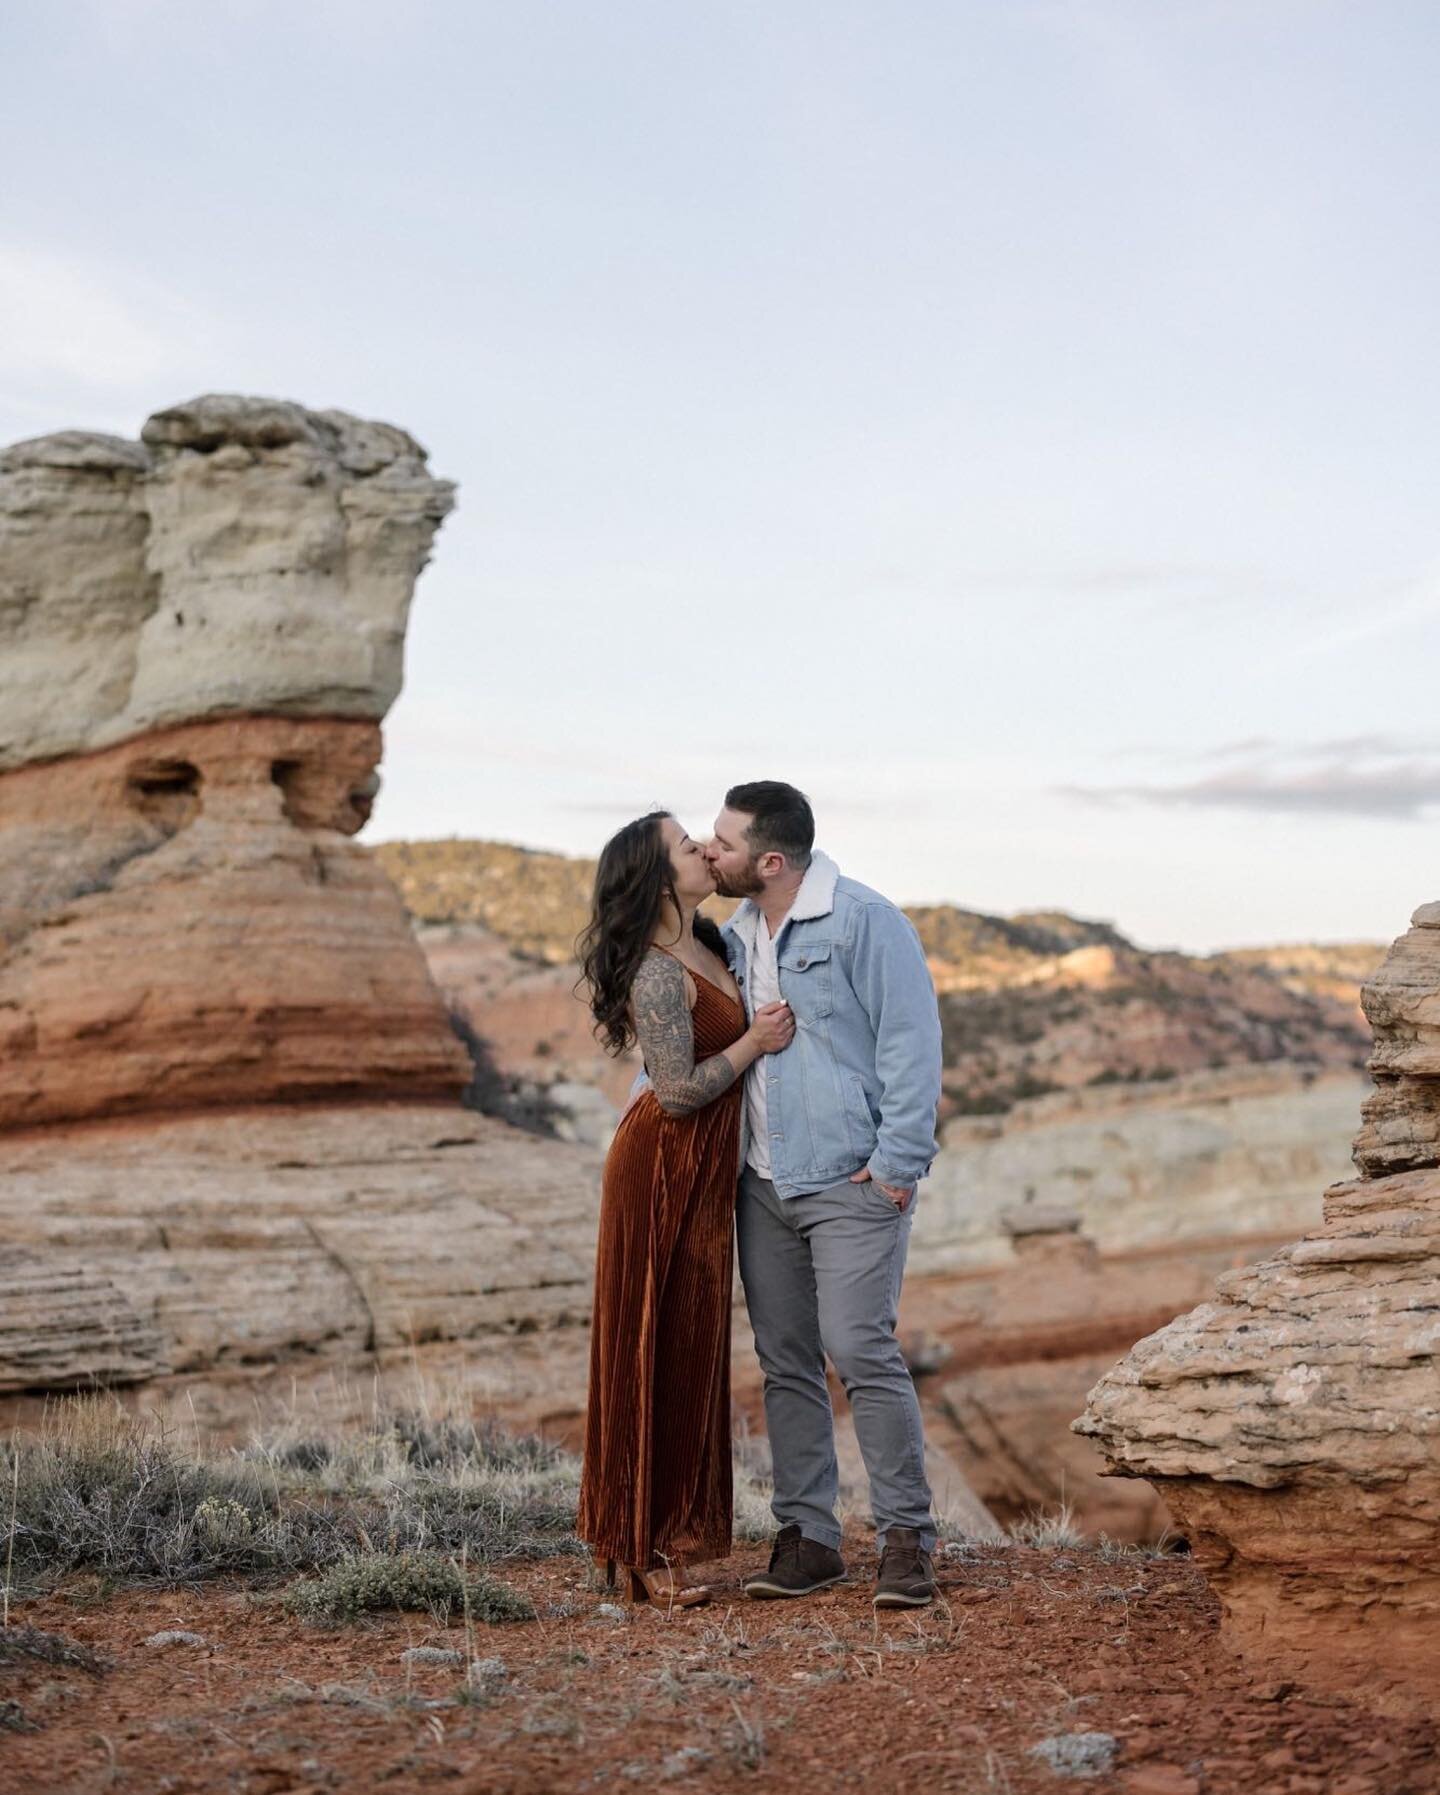 Getting ready to deliver these engagement photos to Sarah and Adam! We had so much fun finding and scouting this location together, Wyoming has so many hidden gems! Can&rsquo;t wait to capture their wedding day!

Couple: @sarahsiems @morse_code686

#